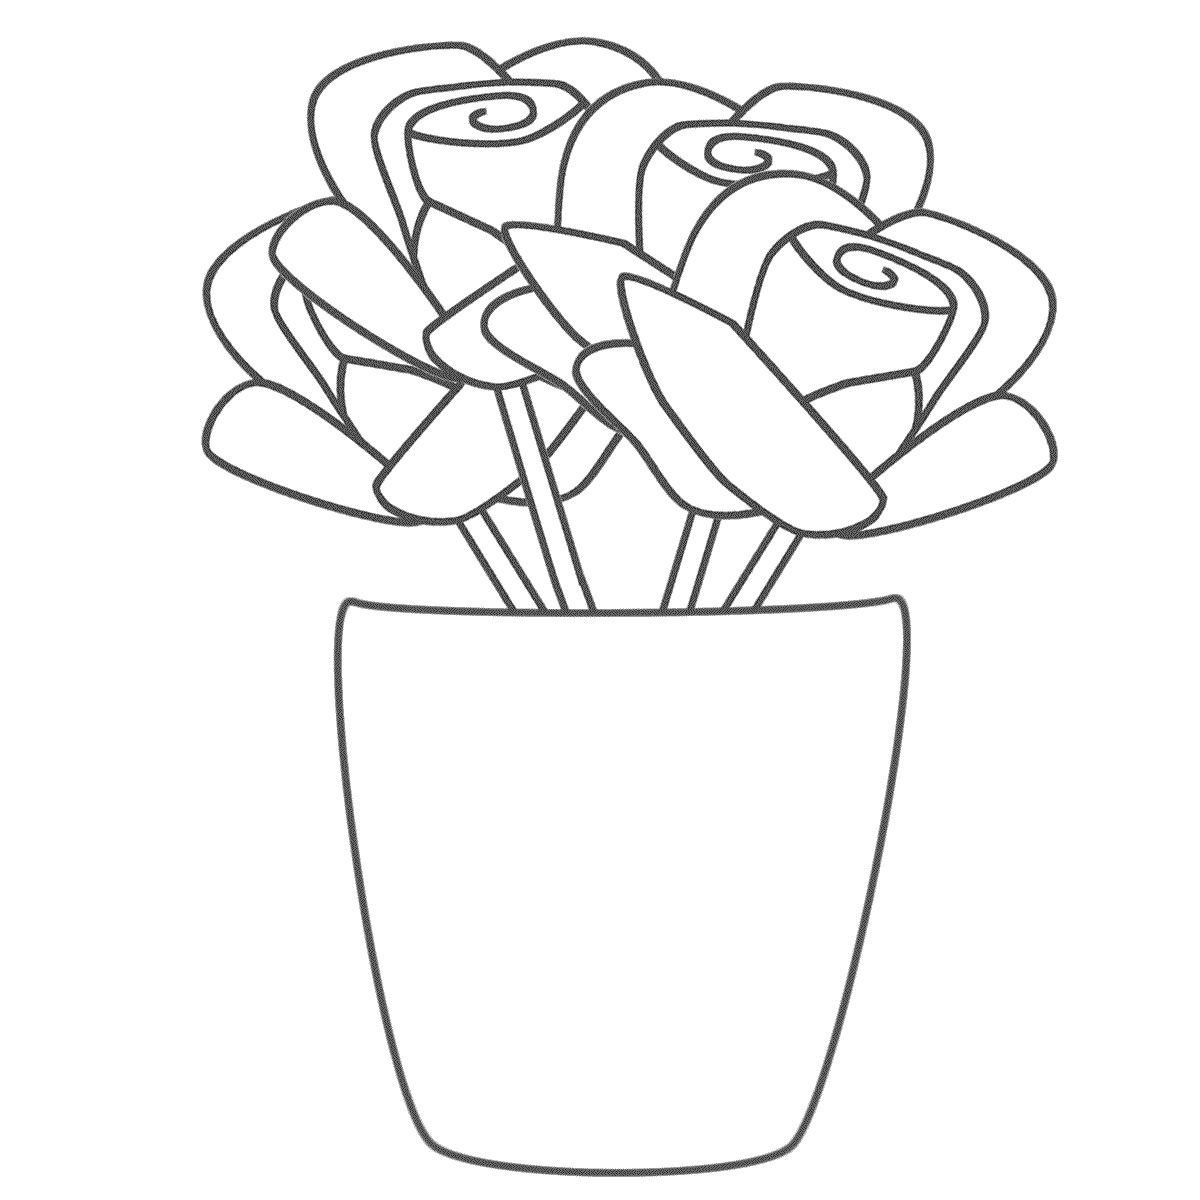 free printable roses coloring pages for kids - coloring page rose ...